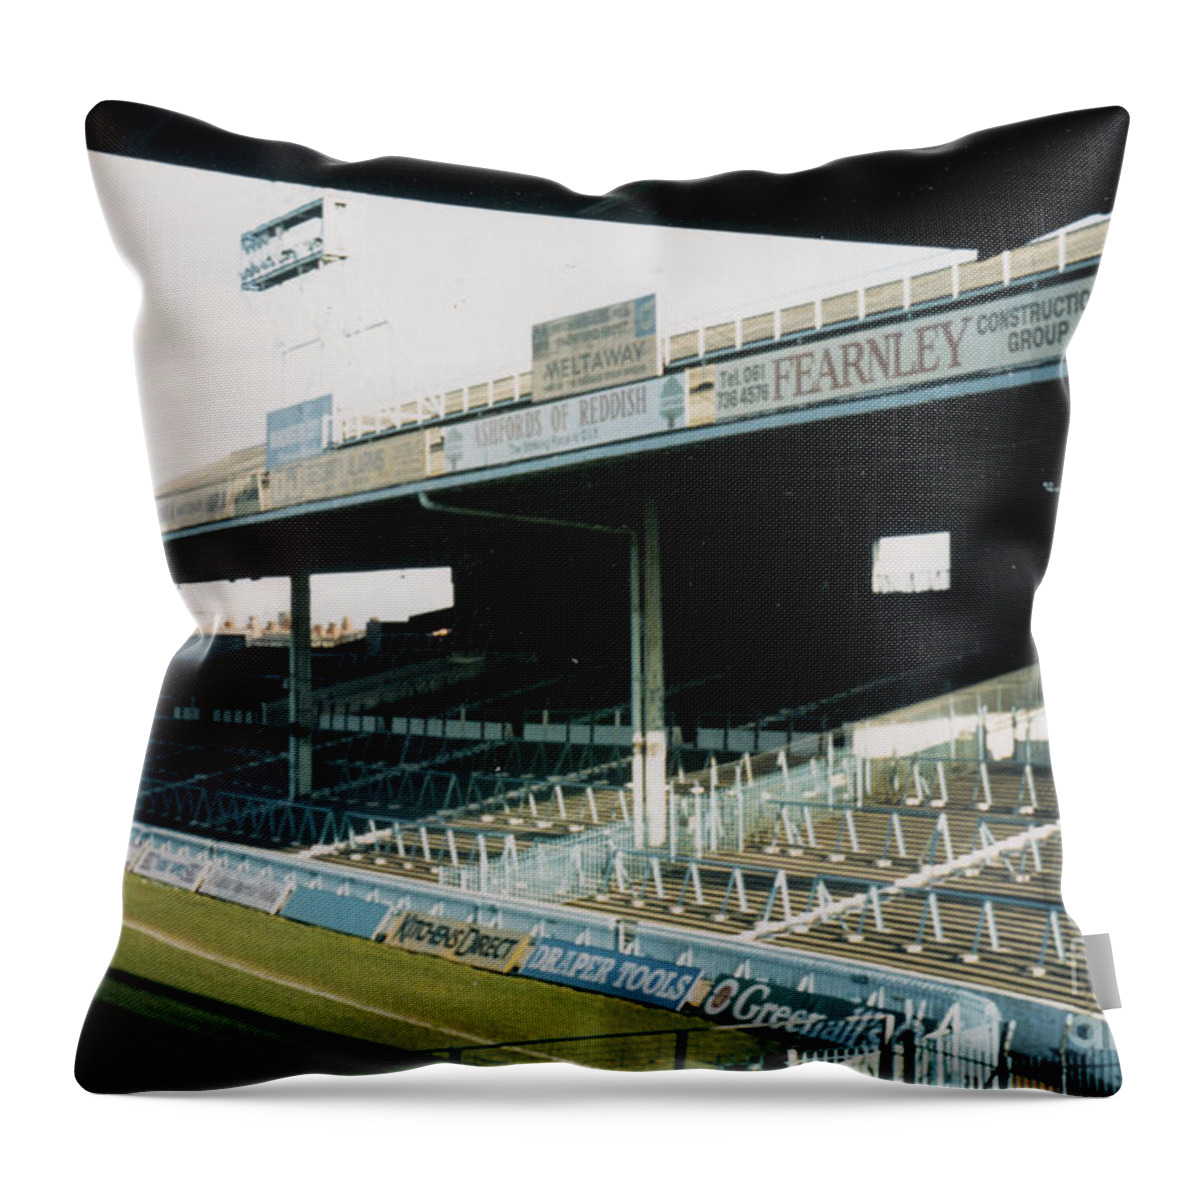 Manchester City Throw Pillow featuring the photograph Manchester City - Maine Road - East Stand 1 - 1984 by Legendary Football Grounds